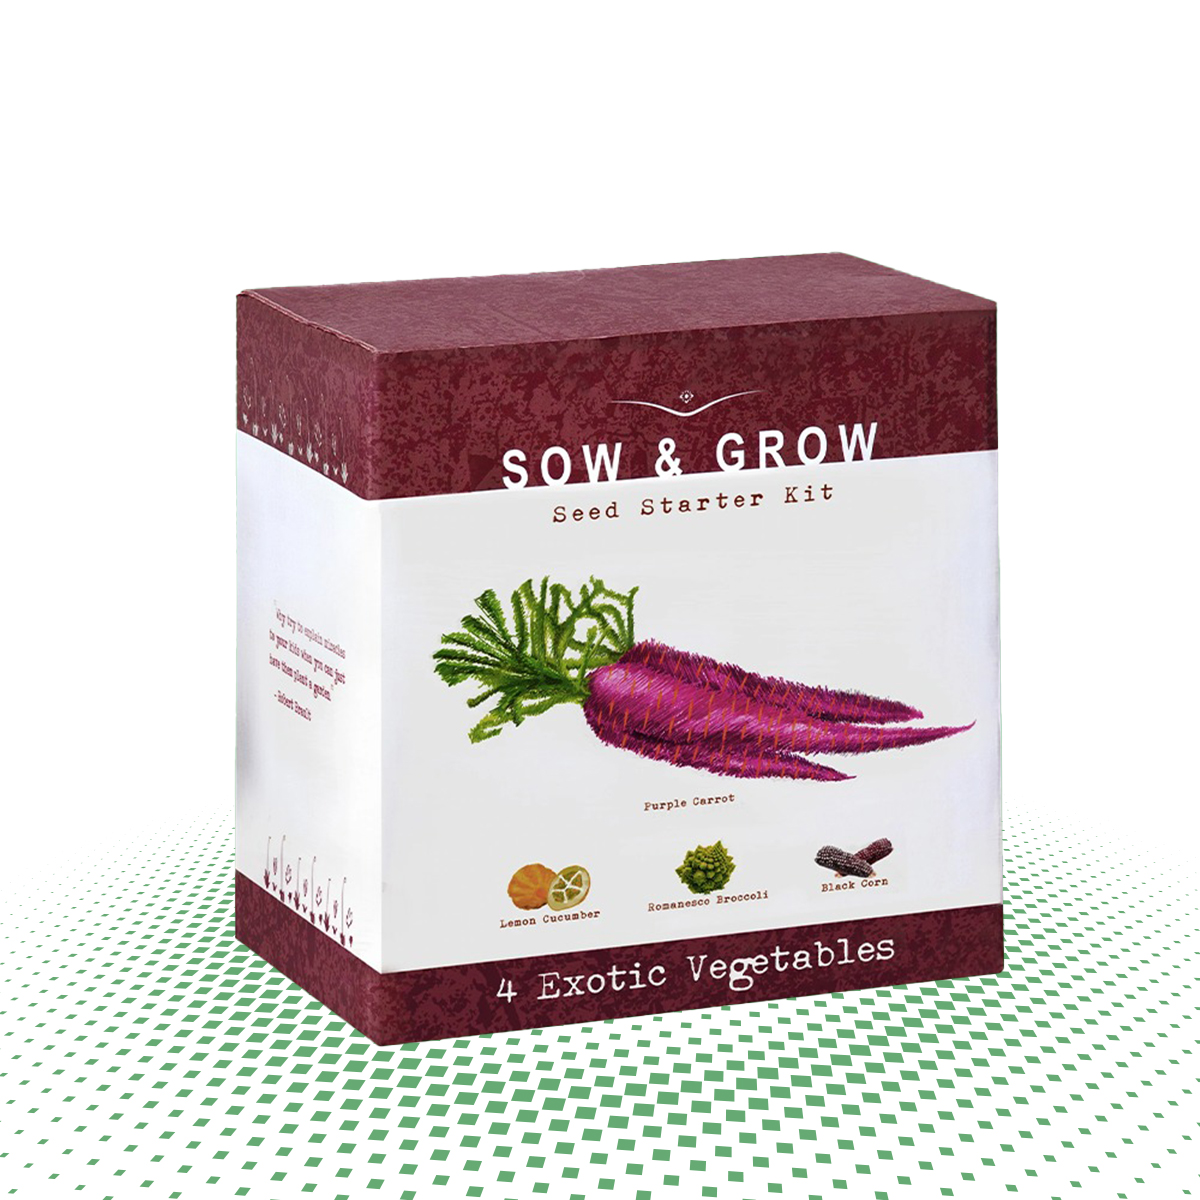 Get Custom Vegetable Seed Boxes at Wholesale Prices - Texas - Arlington ID1544448